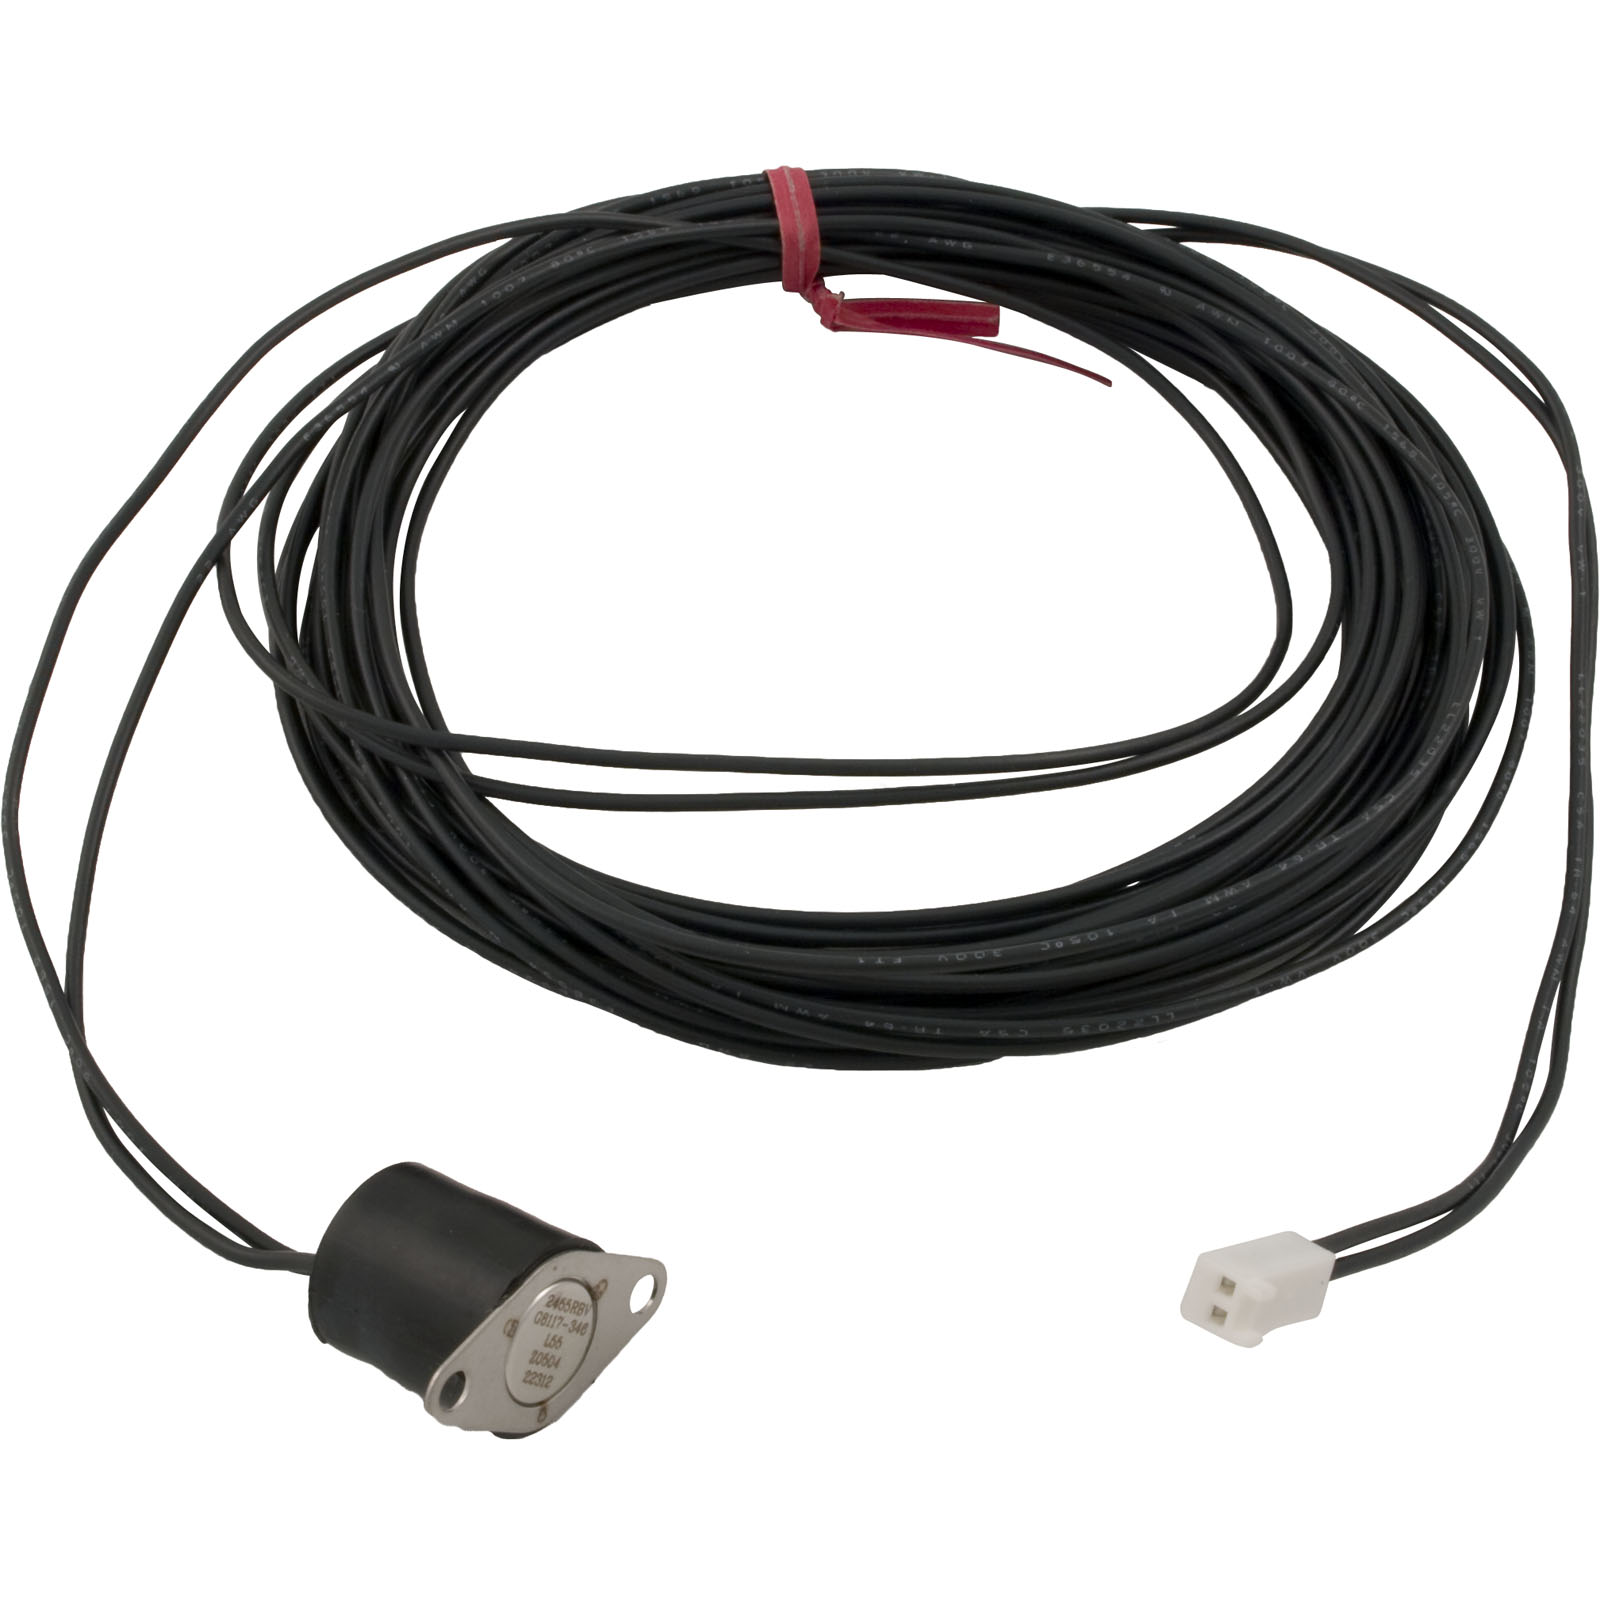 Picture of 22312 Freeze Control Balboa External 15 foot Cord